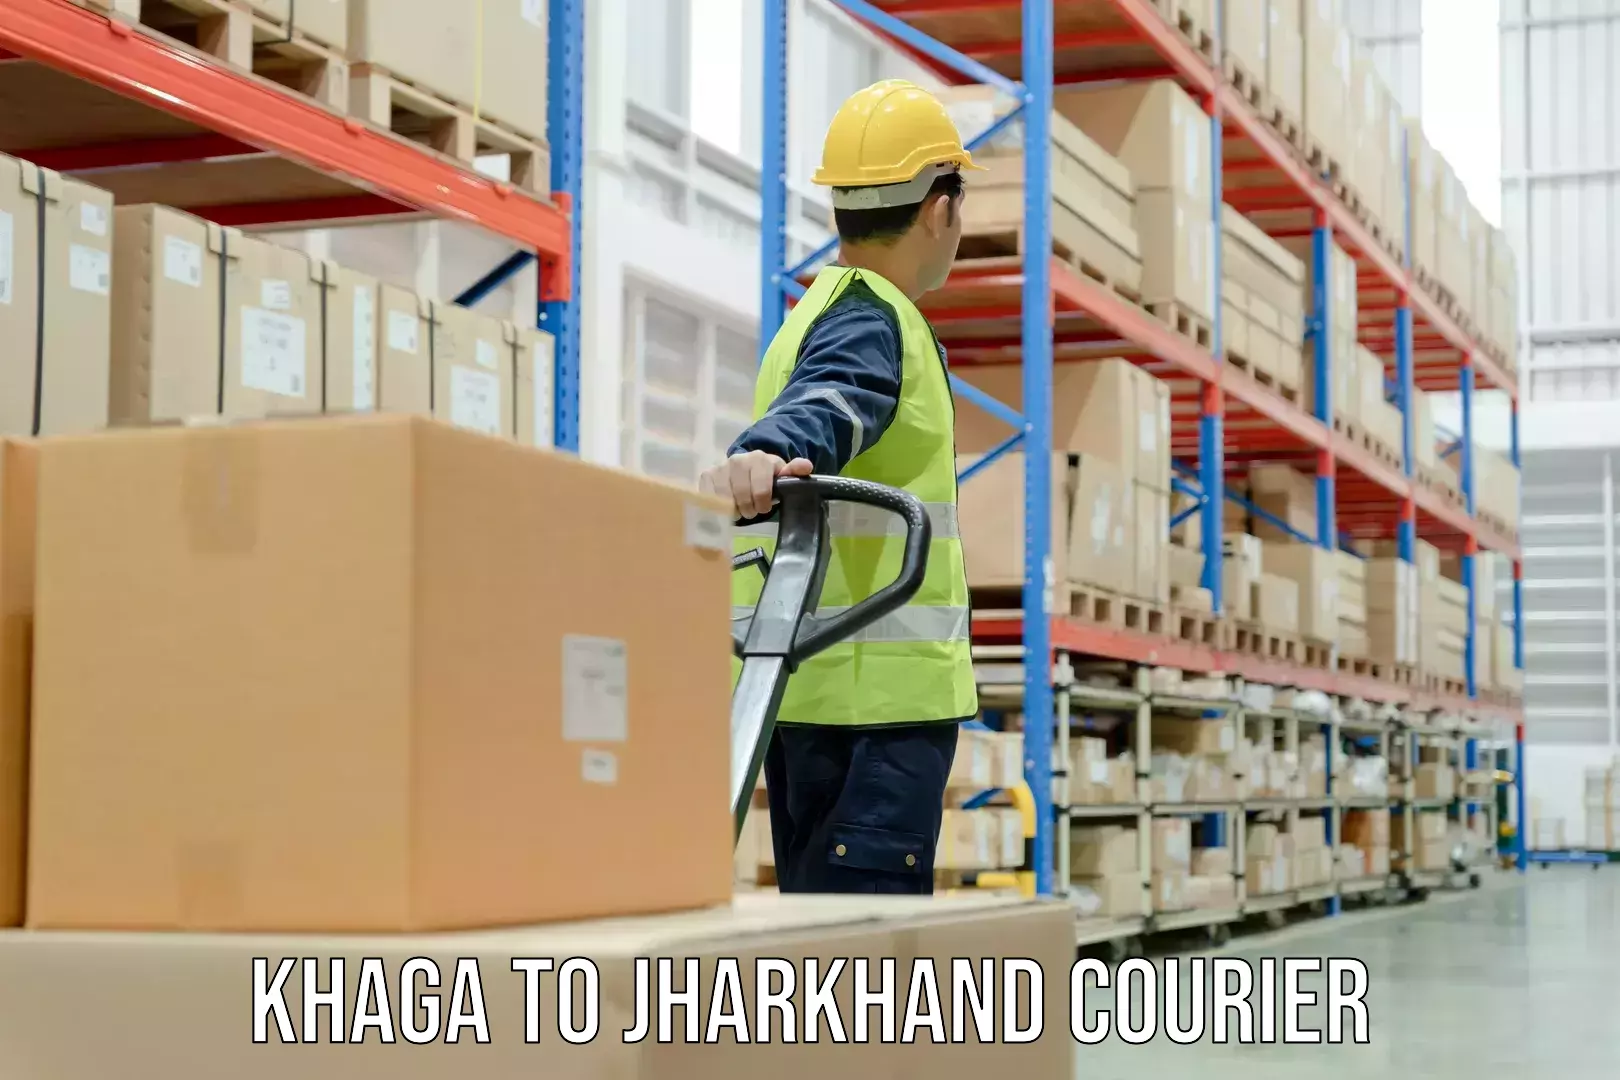 24/7 courier service in Khaga to Jharkhand